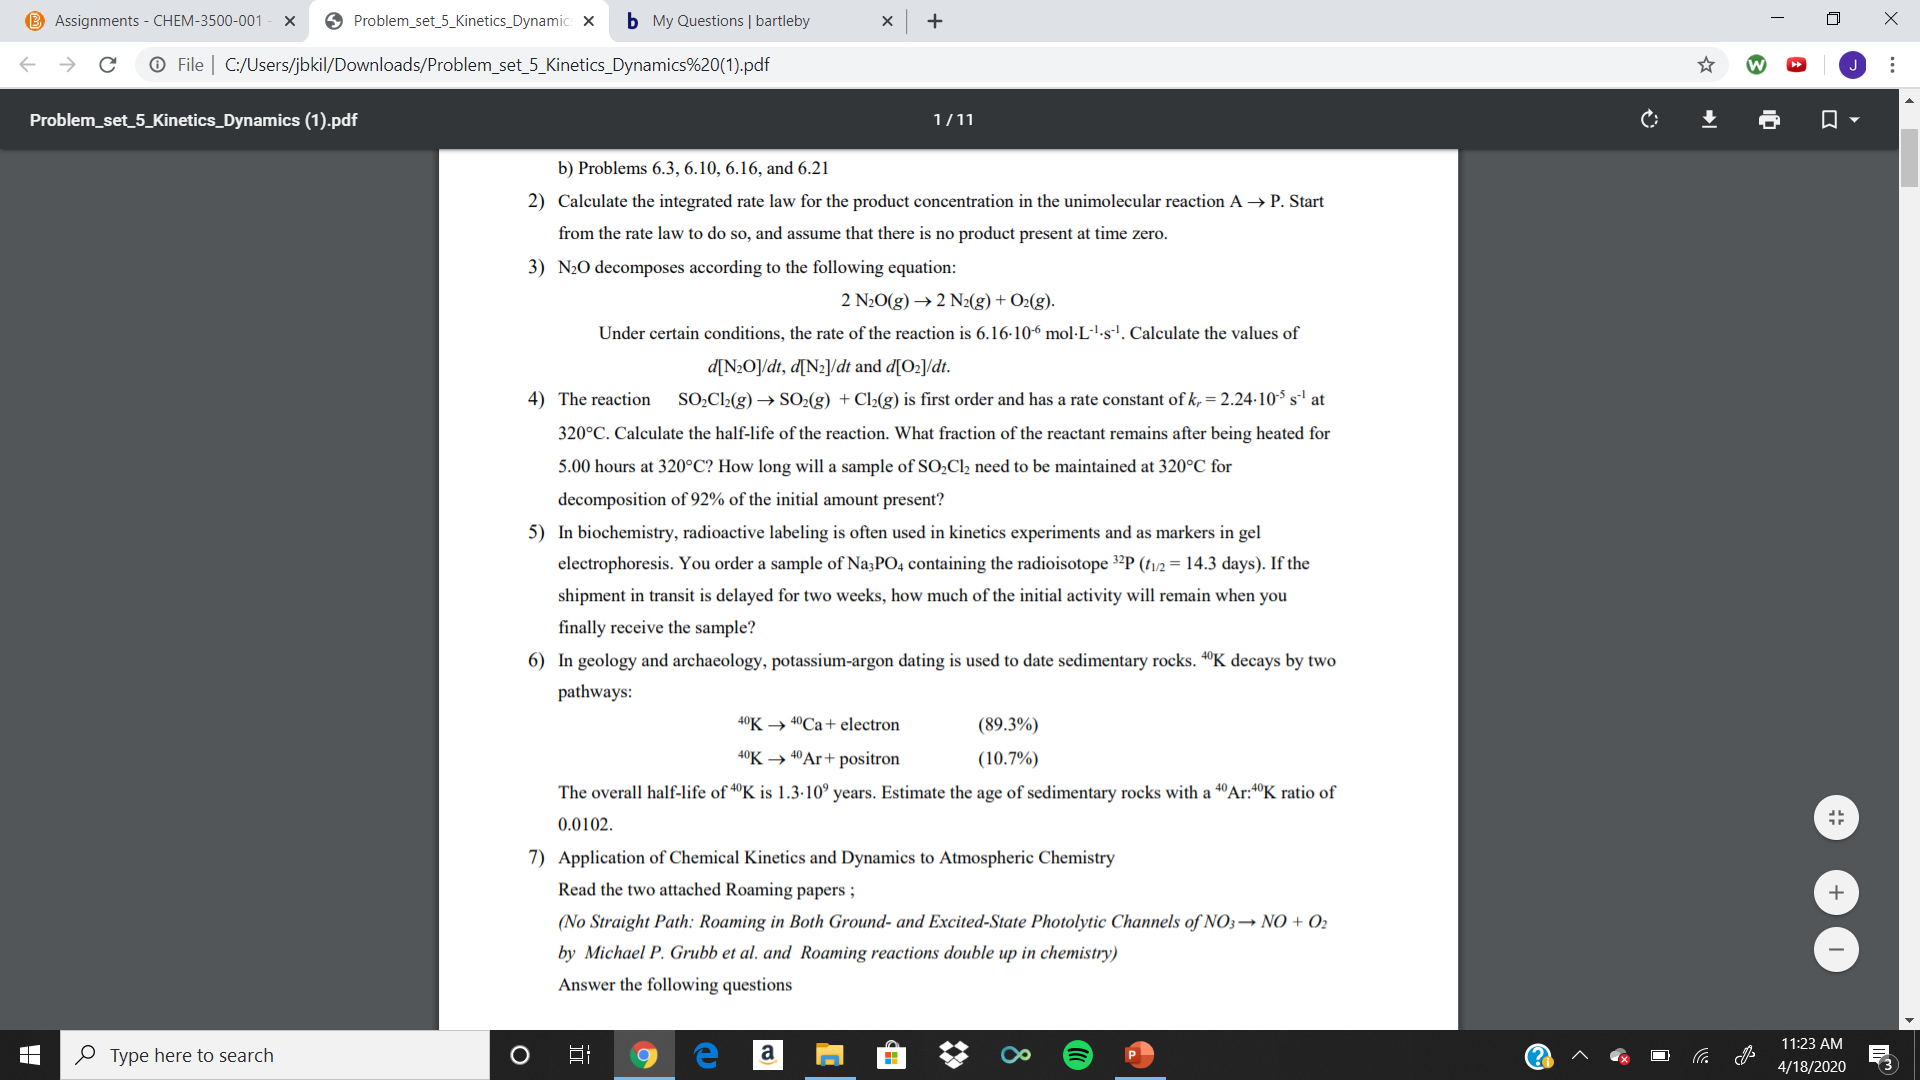 B Assignments - CHEM-3500-001
O Problem_set_5_Kinetics_Dynamic: X
b My Questions | bartleby
O File | C:/Users/jbkil/Downloads/Problem_set_5_Kinetics_Dynamics%20(1).pdf
Problem_set_5_Kinetics_Dynamics (1).pdf
1/11
b) Problems 6.3, 6.10, 6.16, and 6.21
2) Calculate the integrated rate law for the product concentration in the unimolecular reaction A → P. Start
from the rate law to do so, and assume that there is no product present at time zero.
3) N20 decomposes according to the following equation:
2 N20(g) → 2 N2(g) + O2(g).
Under certain conditions, the rate of the reaction is 6.16-106 mol·L-'-s'. Calculate the values of
d[N2O]/dt, d[Nz]/dt and d[O2]/dt.
4) The reaction
SO,Cl2(g) → SO2(g) + Cl2(g) is first order and has a rate constant of k, = 2.24-10S s' at
320°C. Calculate the half-life of the reaction. What fraction of the reactant remains after being heated for
5.00 hours at 320°C? How long will a sample of SO;Cl2 need to be maintained at 320°C for
decomposition of 92% of the initial amount present?
5) In biochemistry, radioactive labeling is often used in kinetics experiments and as markers in gel
electrophoresis. You order a sample of Na;PO4 containing the radioisotope 3²P (tv/2 = 14.3 days). If the
shipment in transit is delayed for two weeks, how much of the initial activity will remain when you
finally receive the sample?
6) In geology and archaeology, potassium-argon dating is used to date sedimentary rocks. 4°K decays by two
pathways:
40K → 40CA+ electron
(89.3%)
40K → 40Ar+ positron
(10.7%)
The overall half-life of "K is 1.3-10° years. Estimate the age of sedimentary rocks with a 4°Ar:4°K ratio of
0.0102.
7) Application of Chemical Kinetics and Dynamics to Atmospheric Chemistry
Read the two attached Roaming papers ;
(No Straight Path: Roaming in Both Ground- and Excited-State Photolytic Channels of NO3→ NO + O2
by Michael P. Grubb et al. and Roaming reactions double up in chemistry)
Answer the following questions
11:23 AM
O Type here to search
(?
4/18/2020
...
